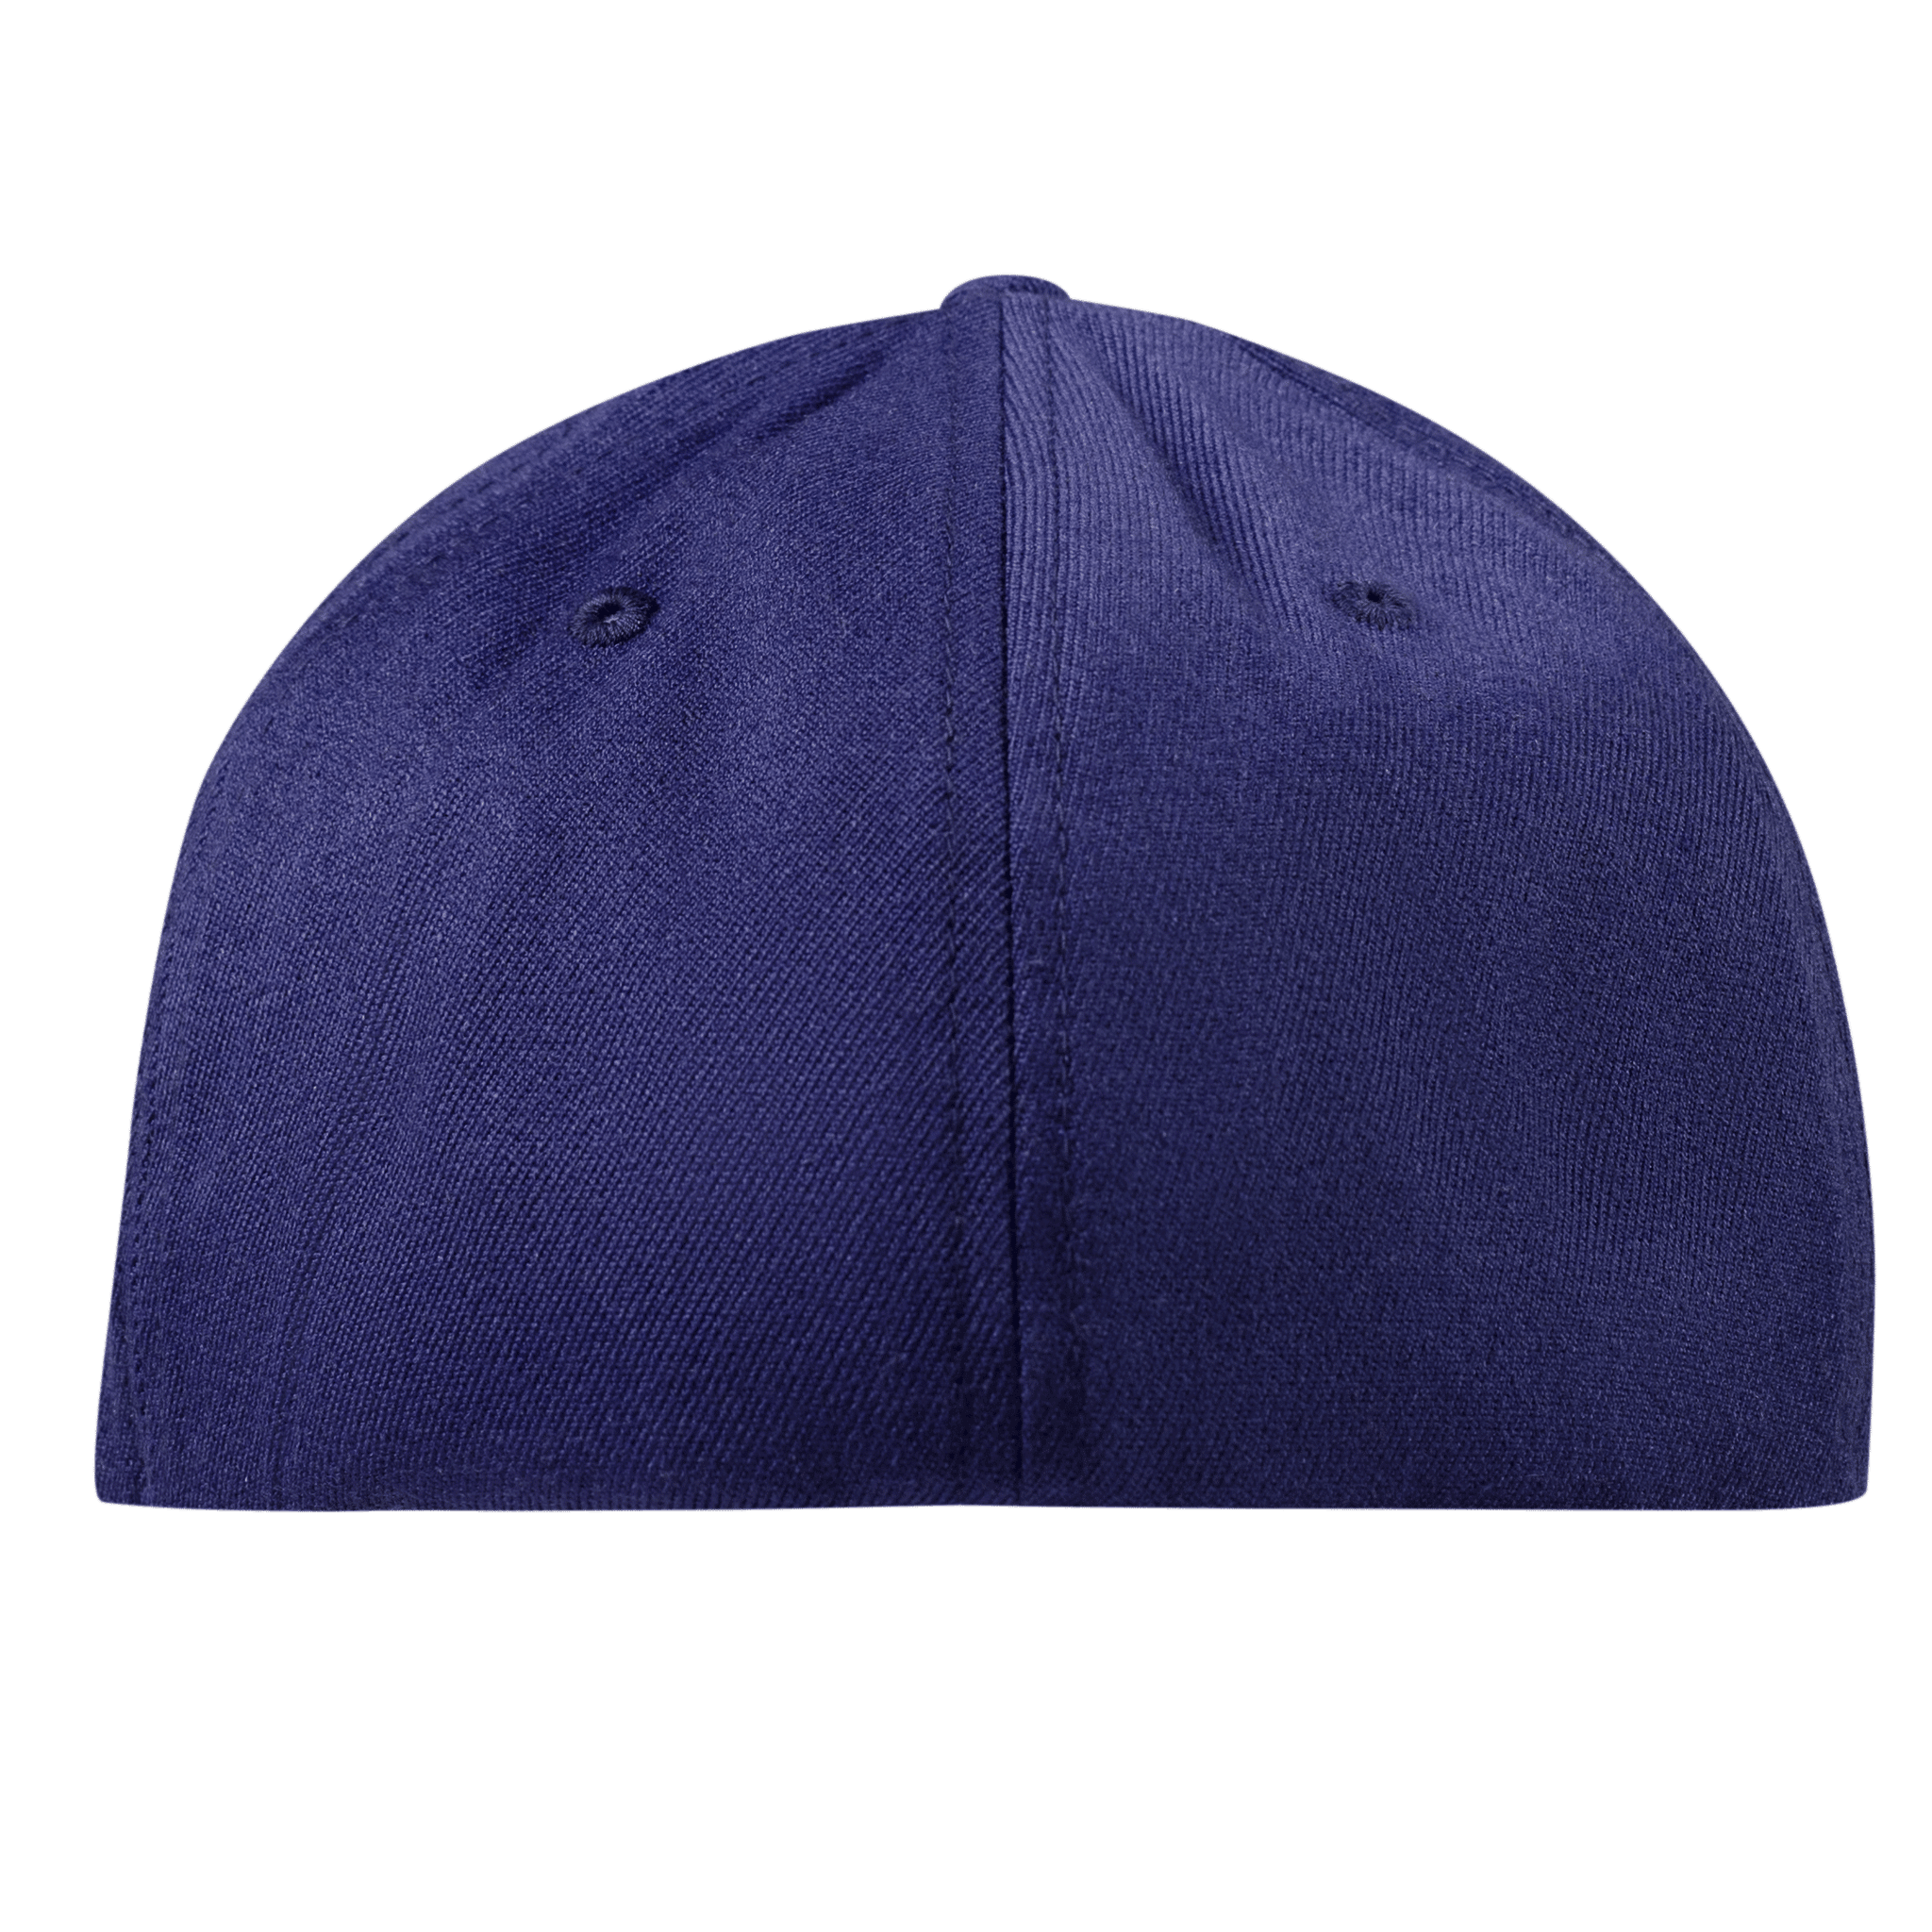 New Mexico Compass Flexfit Fitted Back Navy